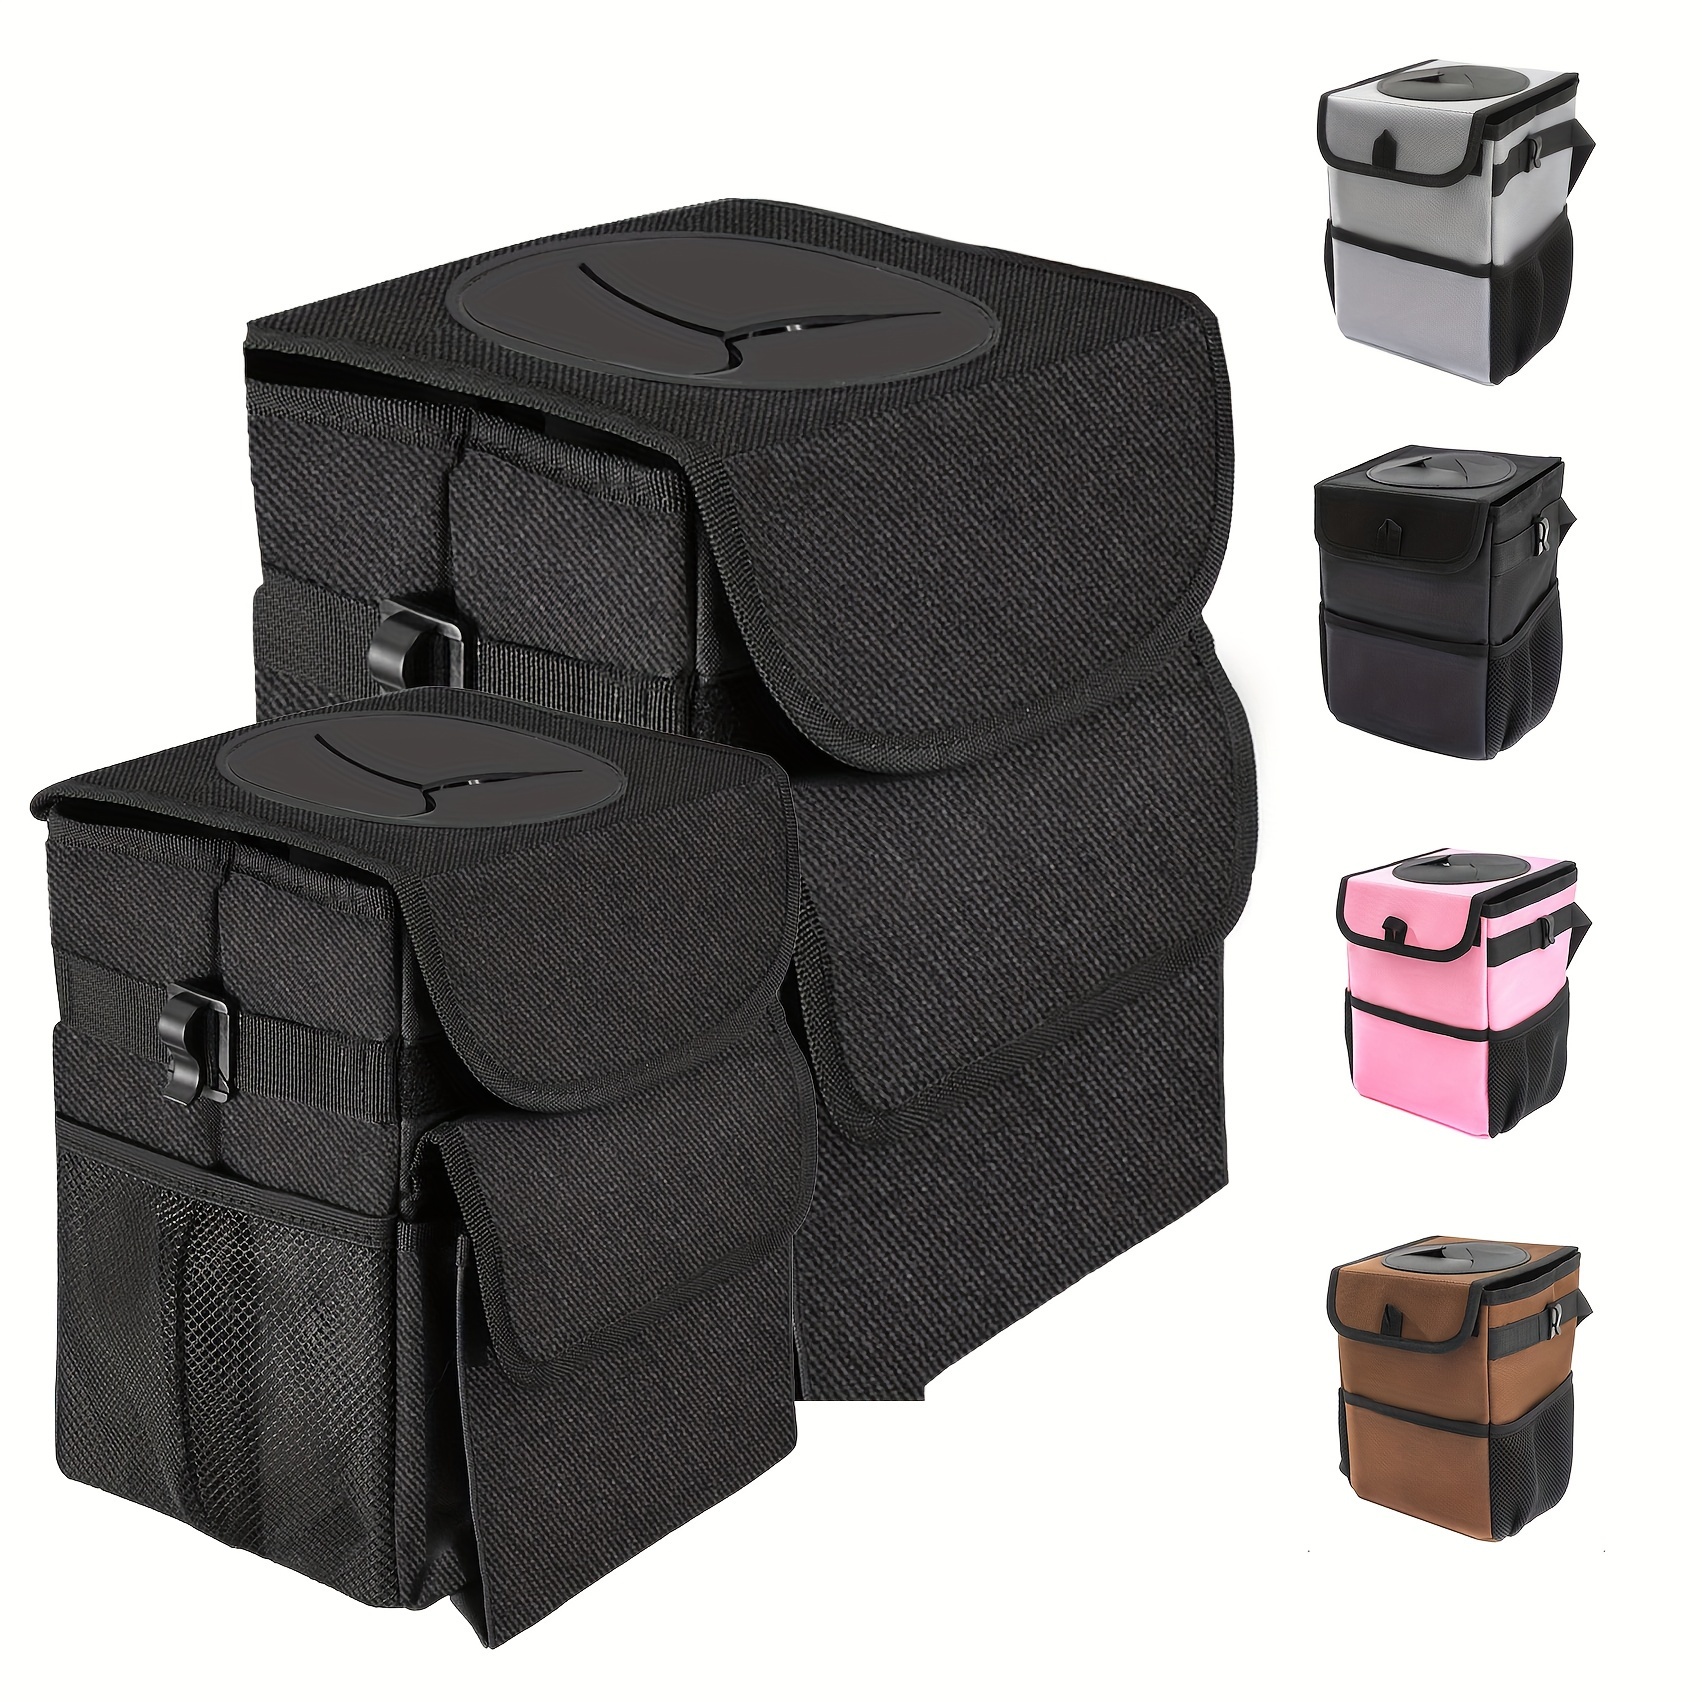 

2 Packs Trash Can With Lid And Storage Pockets -100% Leak-proof Organizer, Waterproof Garbage Can, Waterproof Collapsible Storage Box With Solid Structural Support, Perfect Colorful Box Package